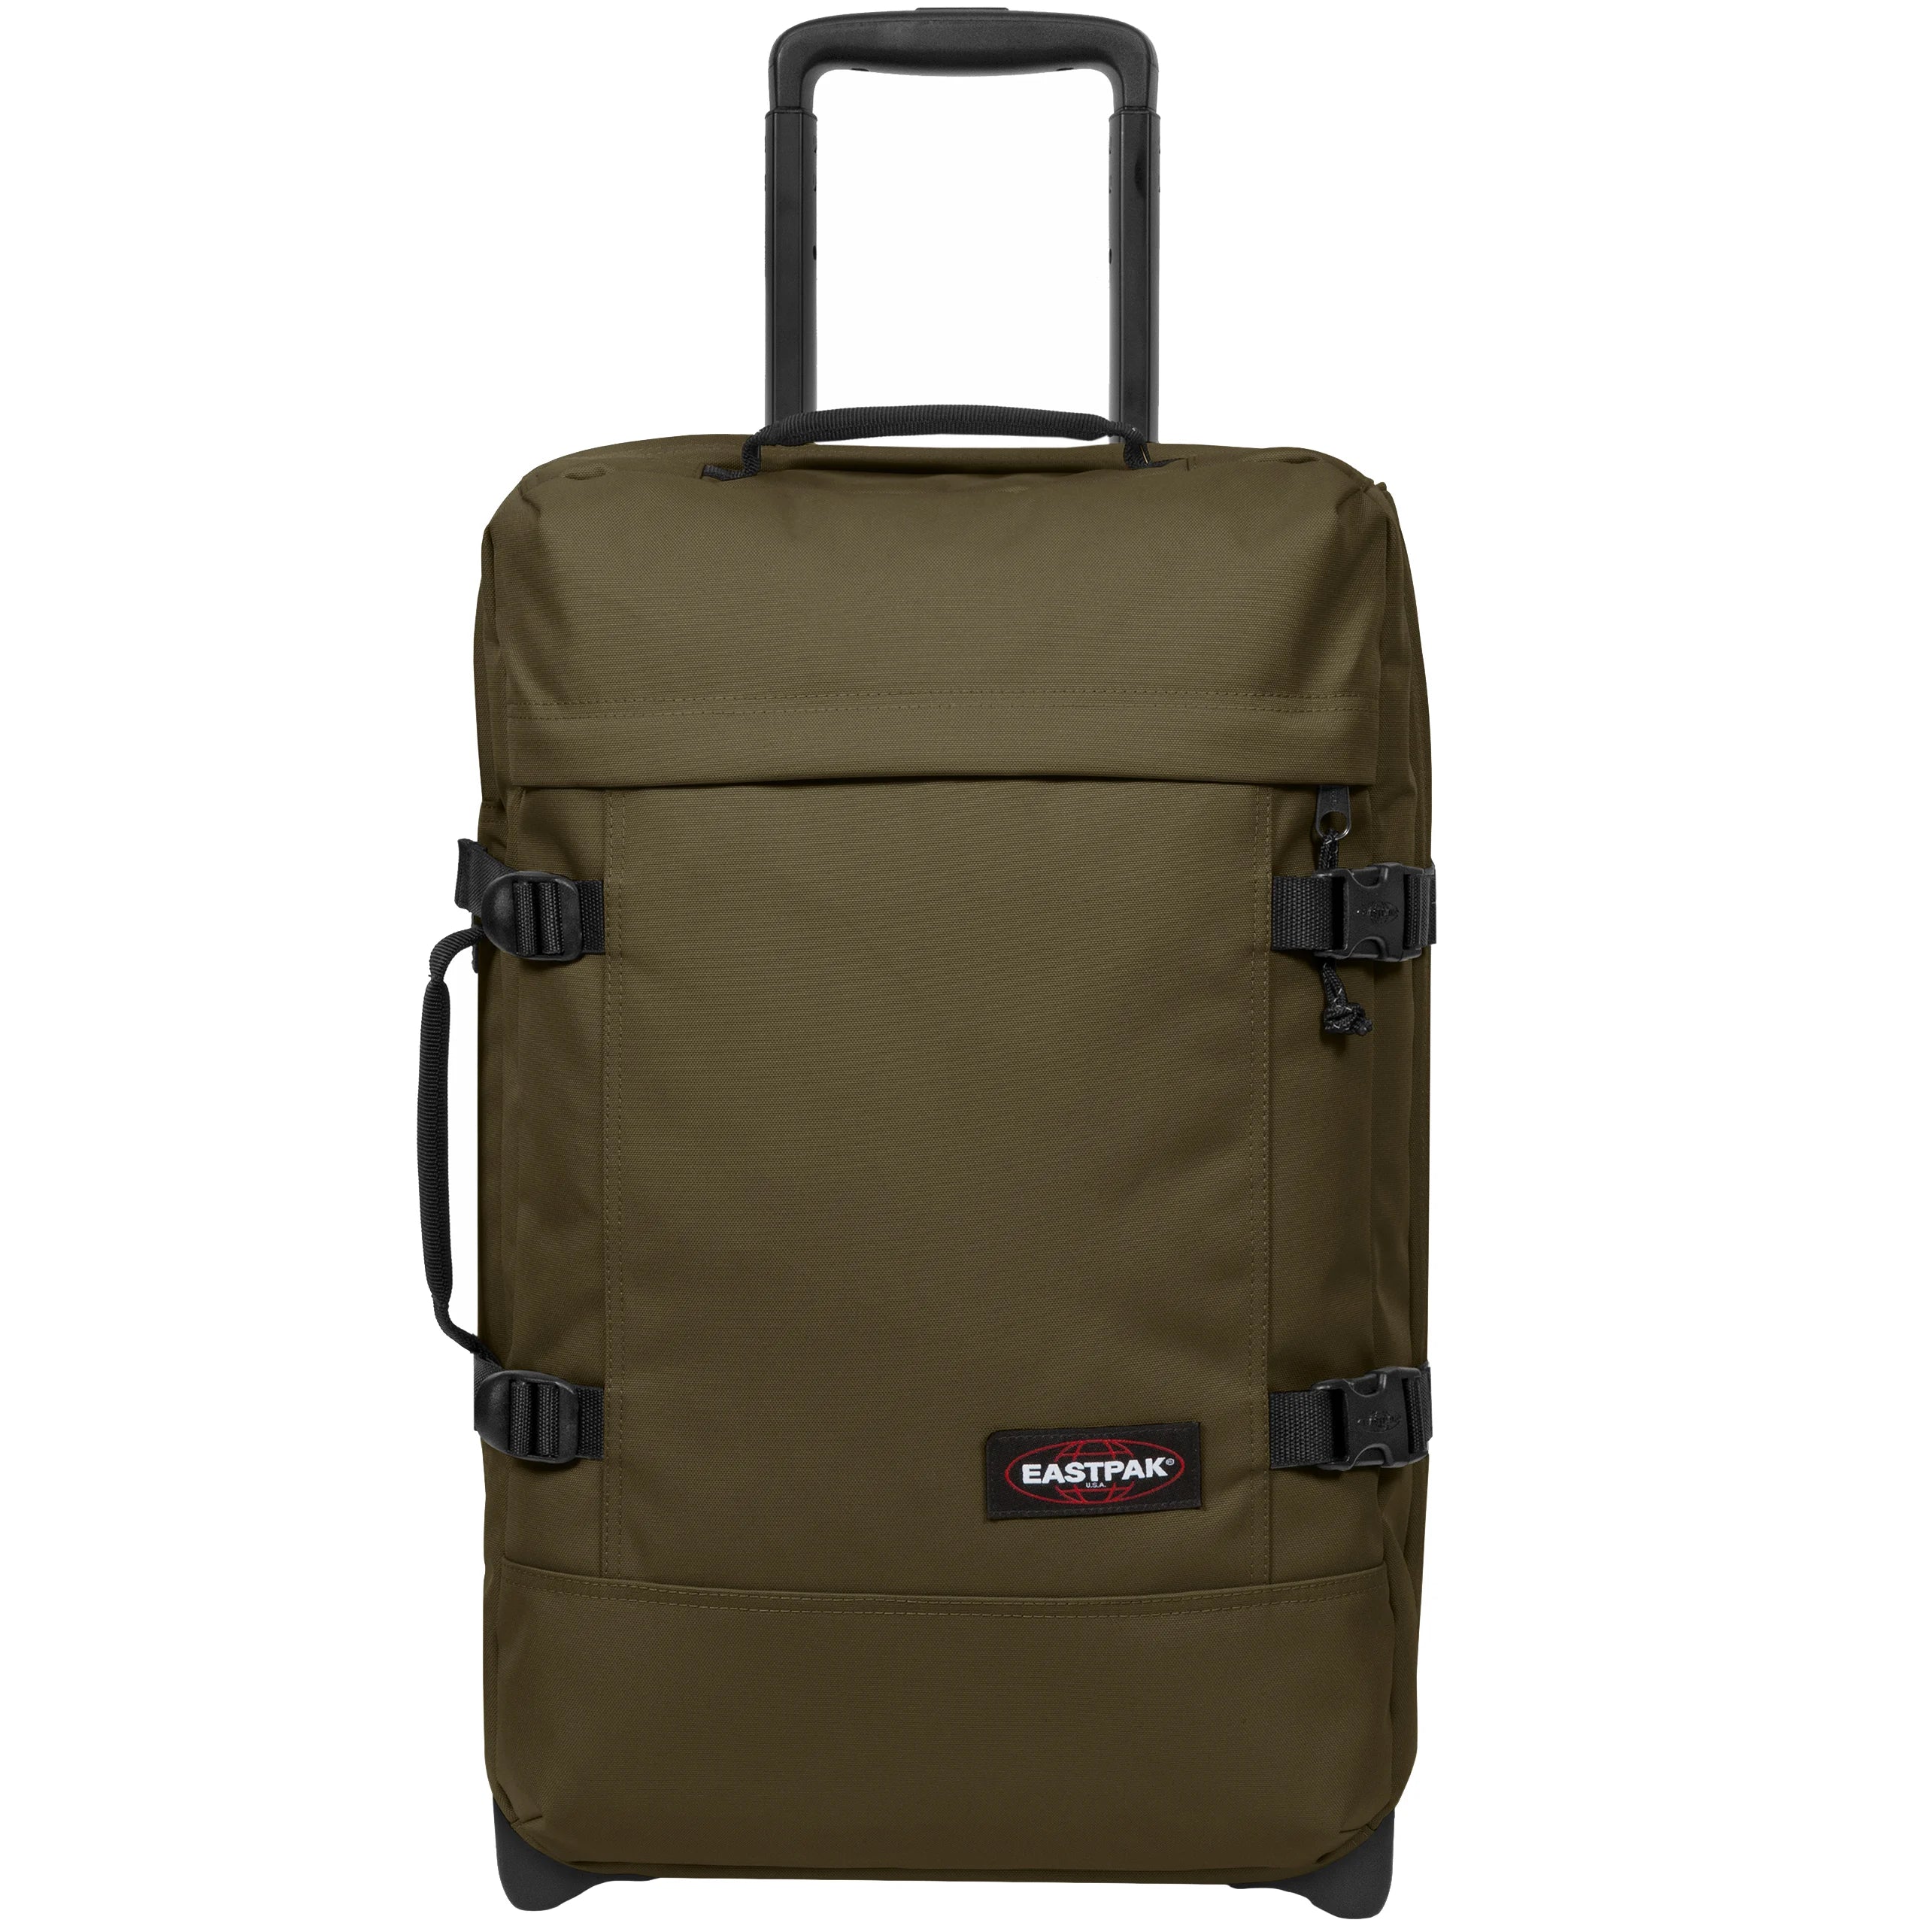 Eastpak Authentic Travel Tranverz 2-roll cabin trolley 51 cm - Army Olive